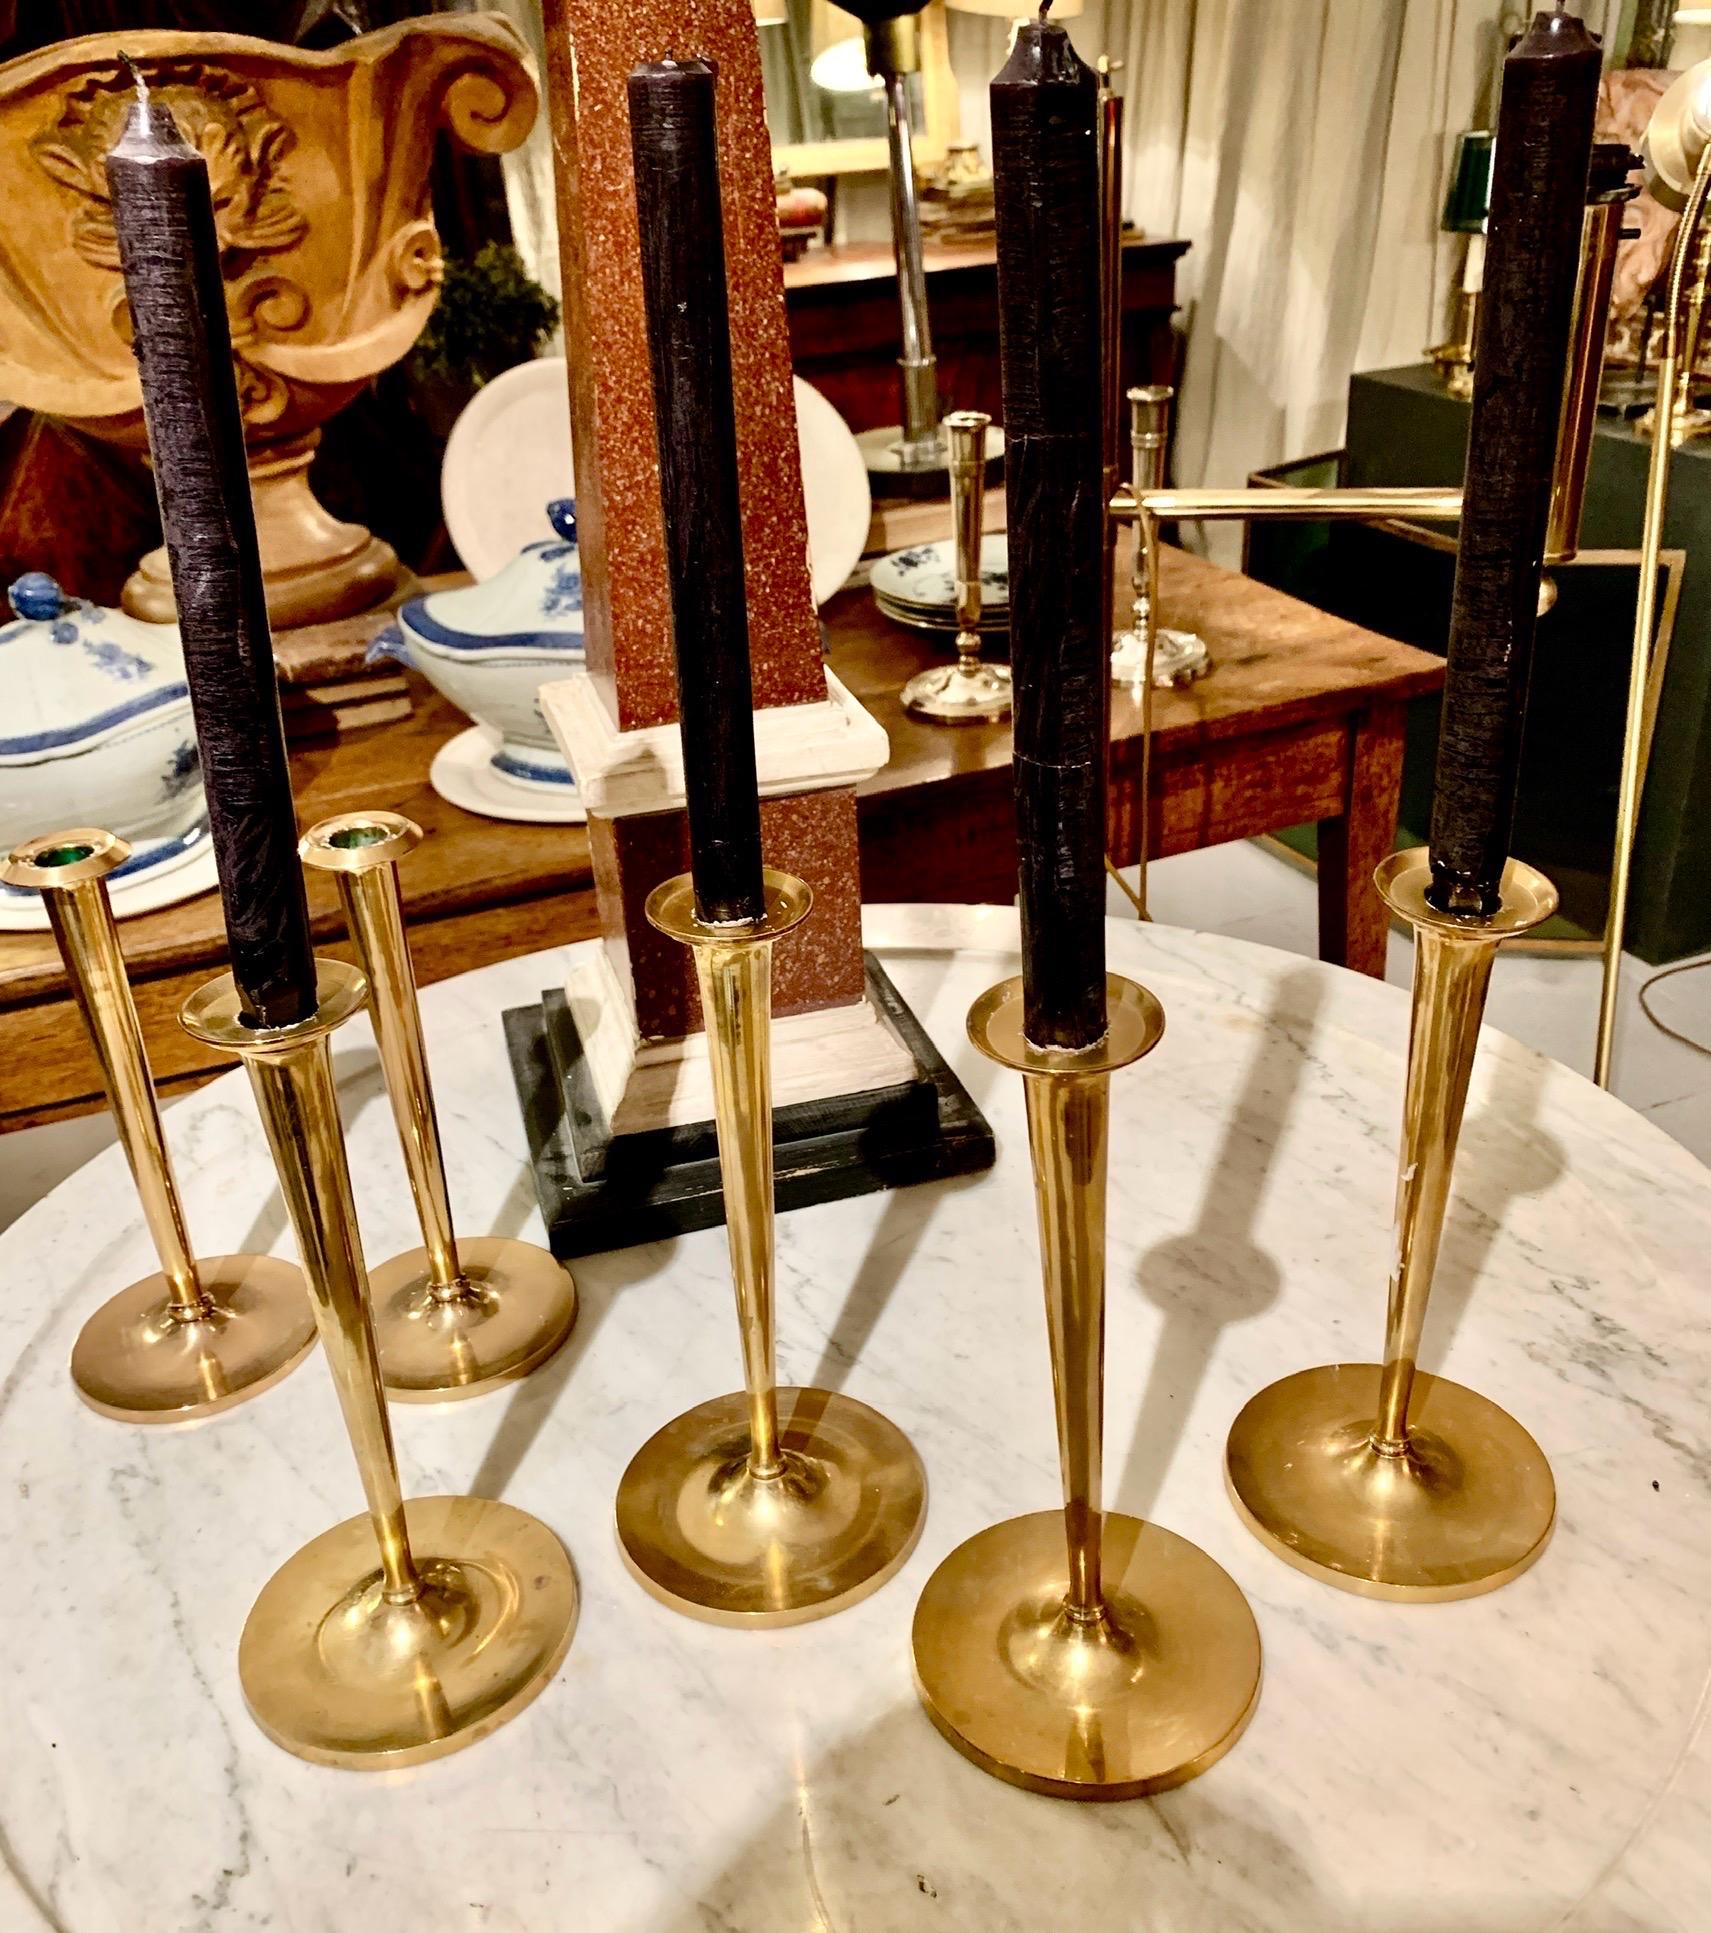 Set of four brass candlesticks, can be sold as a set of two or all four, trumpet-shaped design.
​